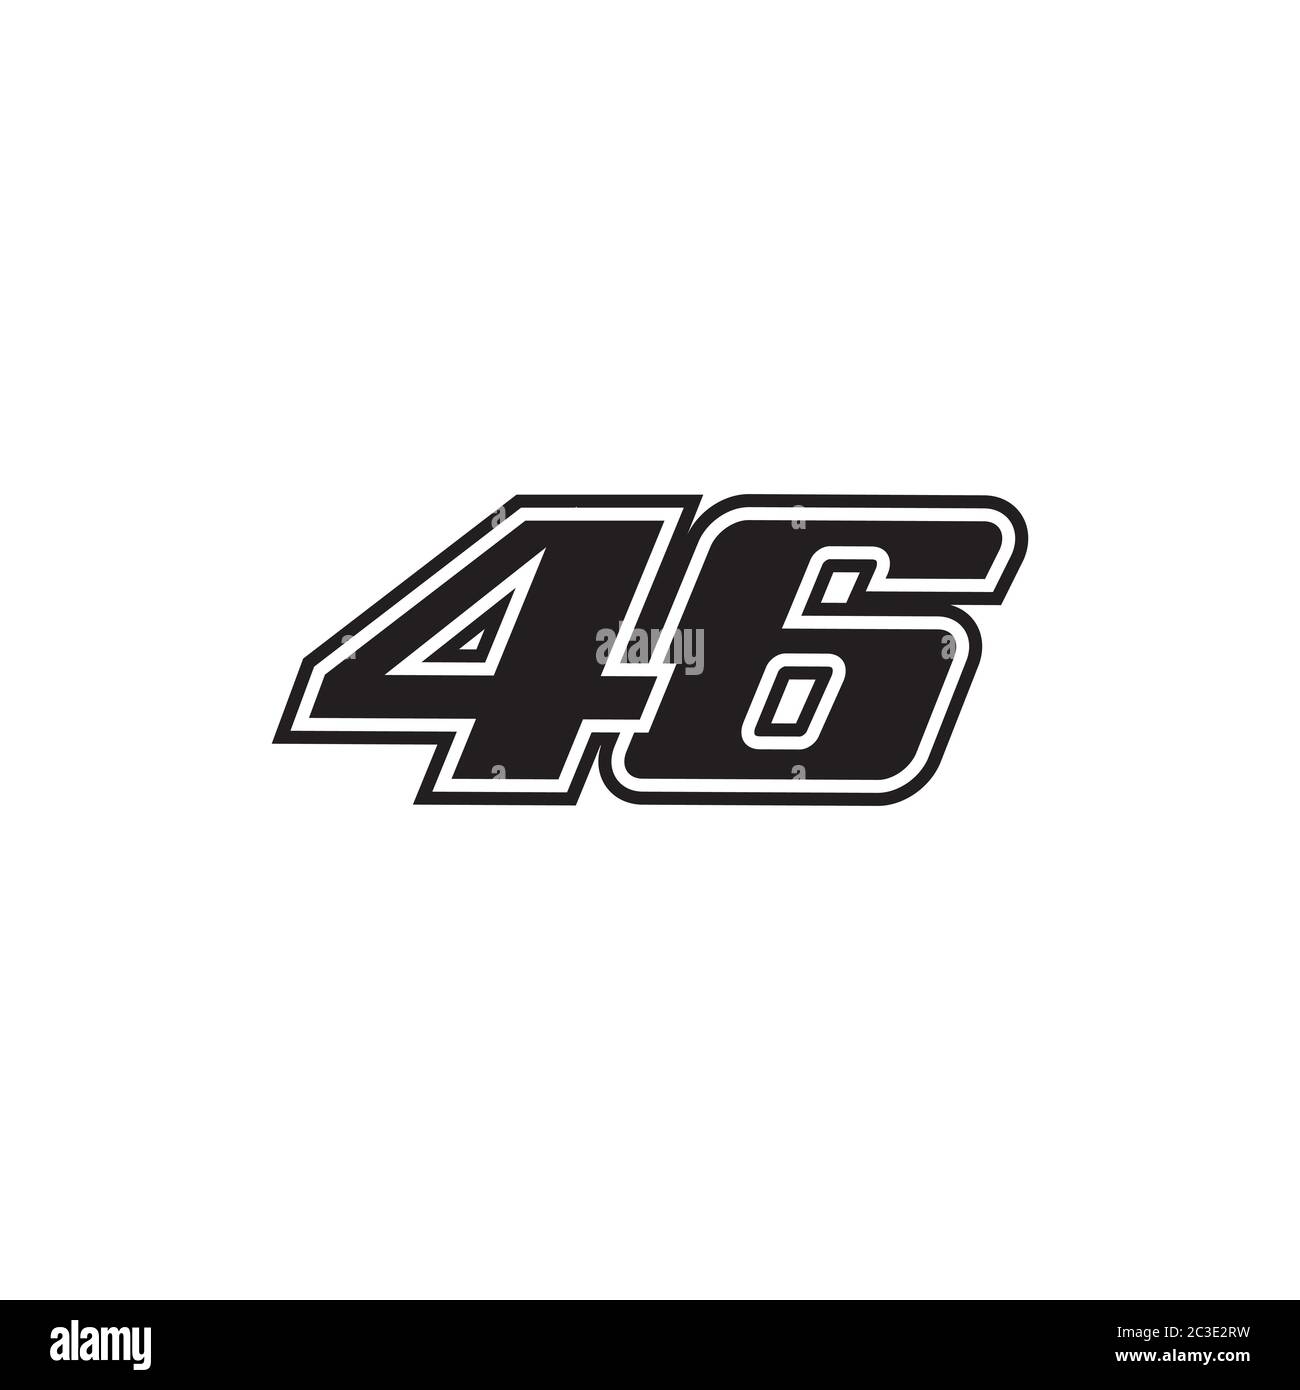 number-46-icon-symbol-vector-isolated-on-white-background-stock-vector